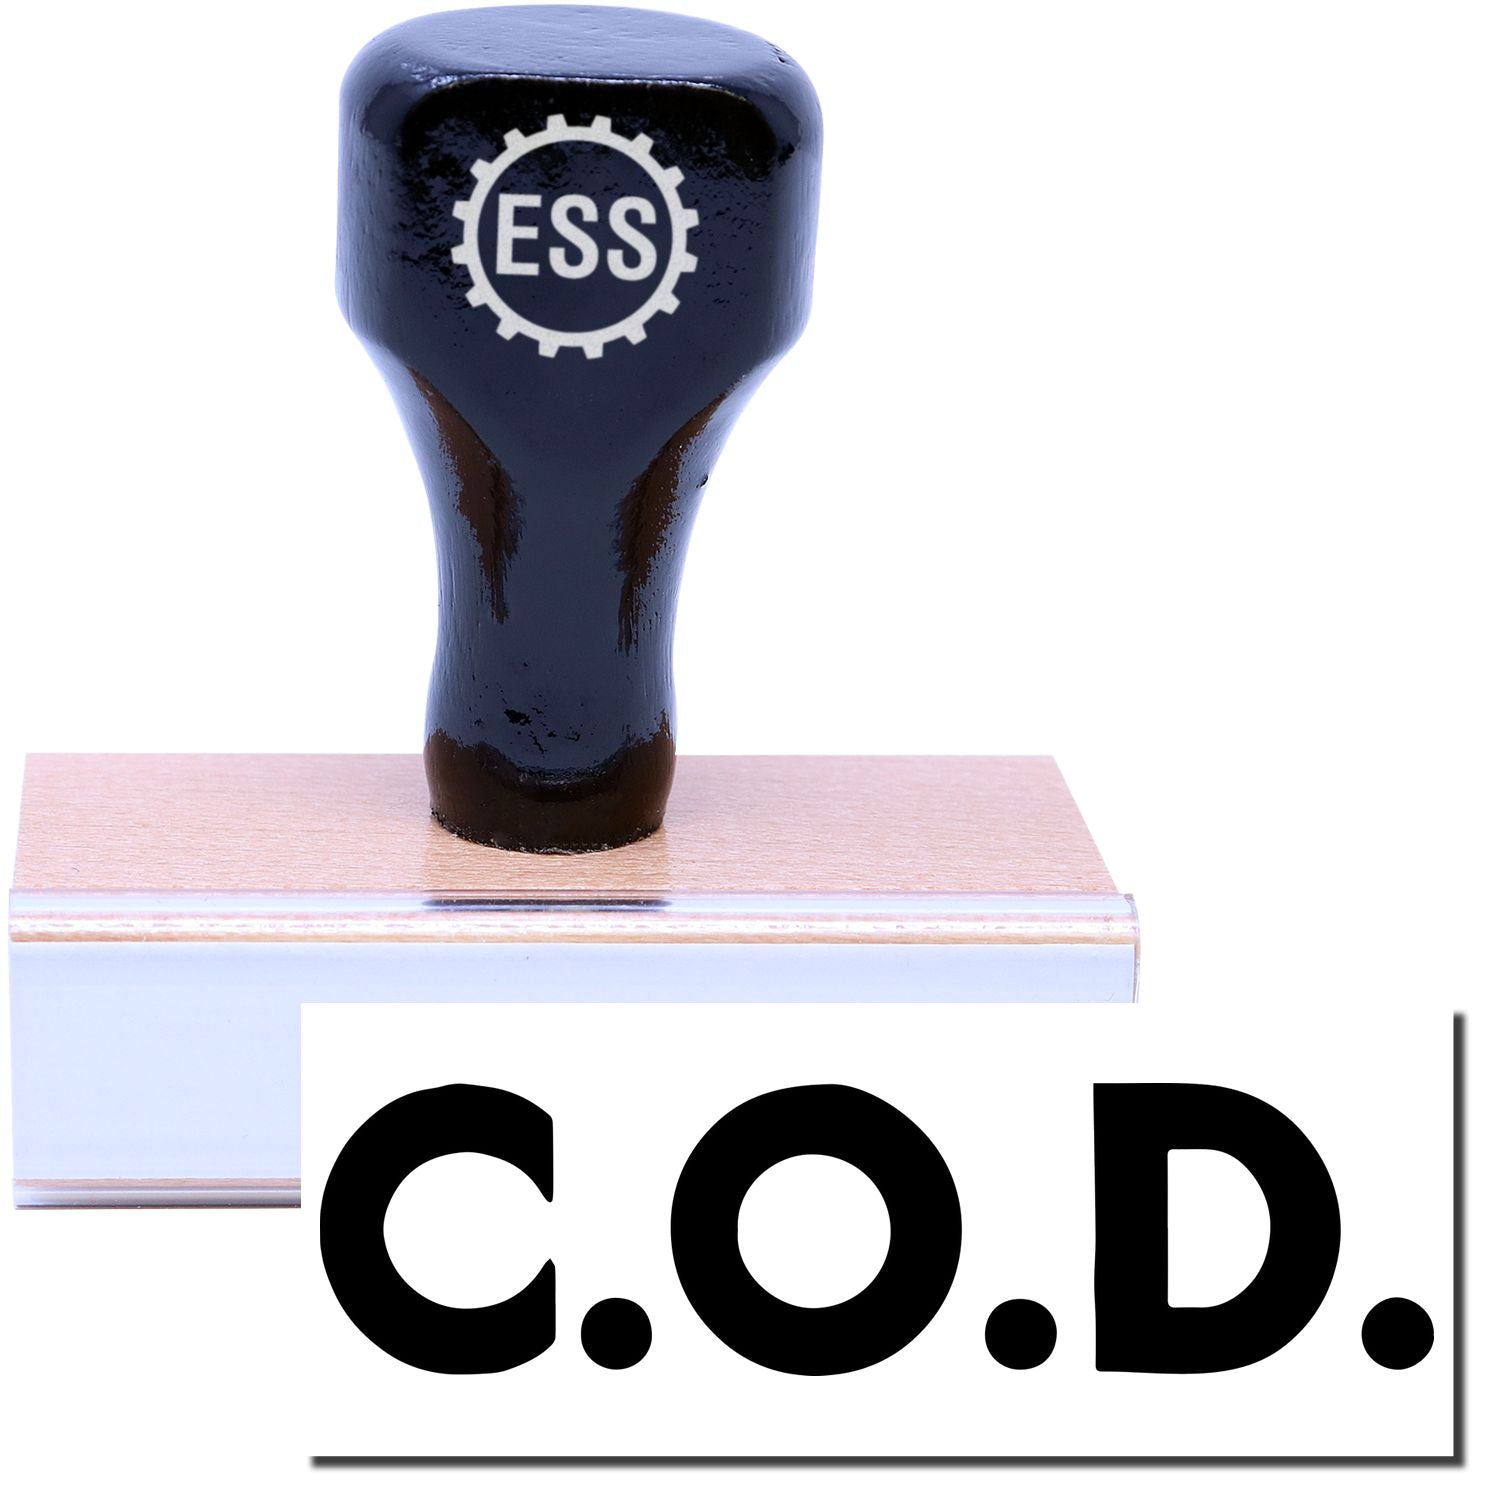 A stock office rubber stamp with a stamped image showing how the text "C.O.D." in bold font is displayed after stamping.